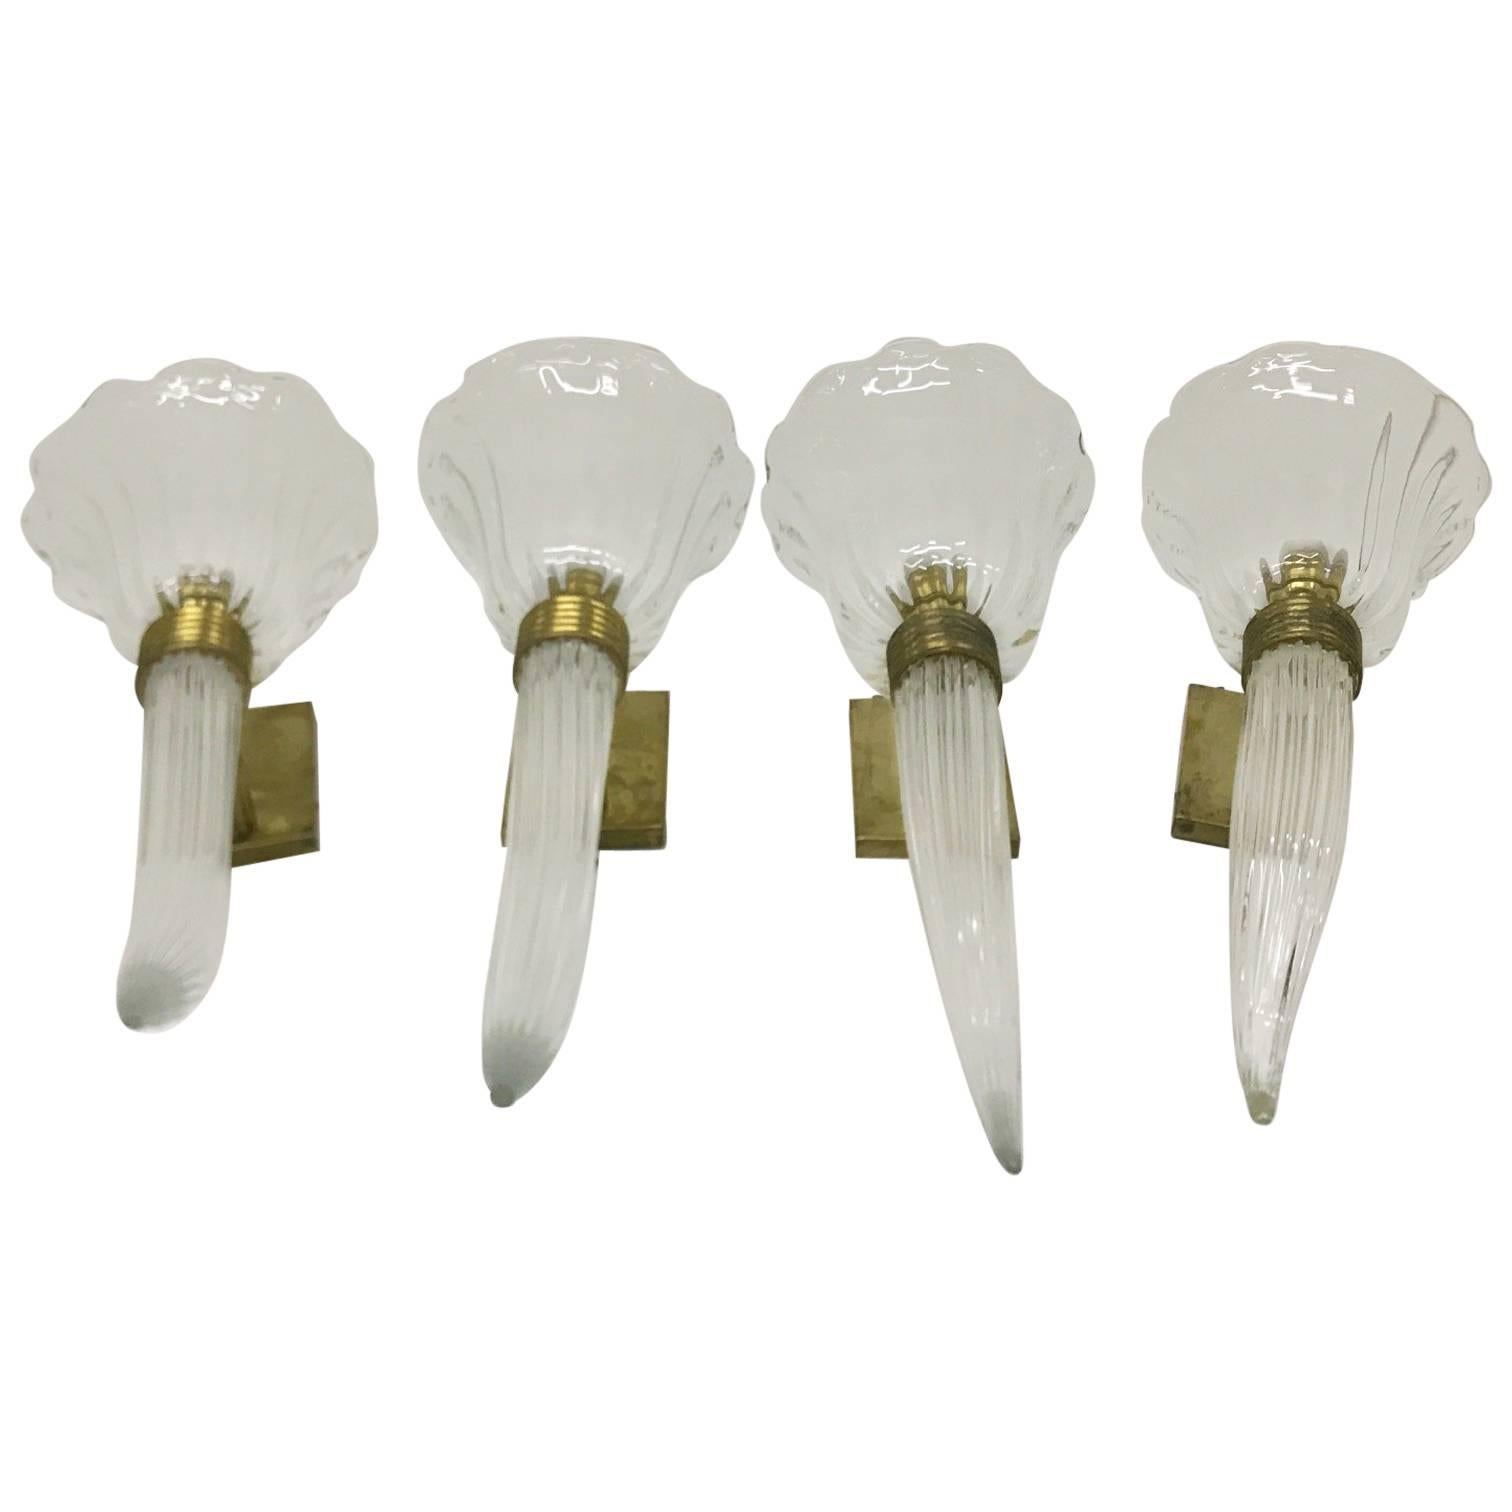 Four Vintage Murano Glass Sconces, Made in Italy, circa 1960